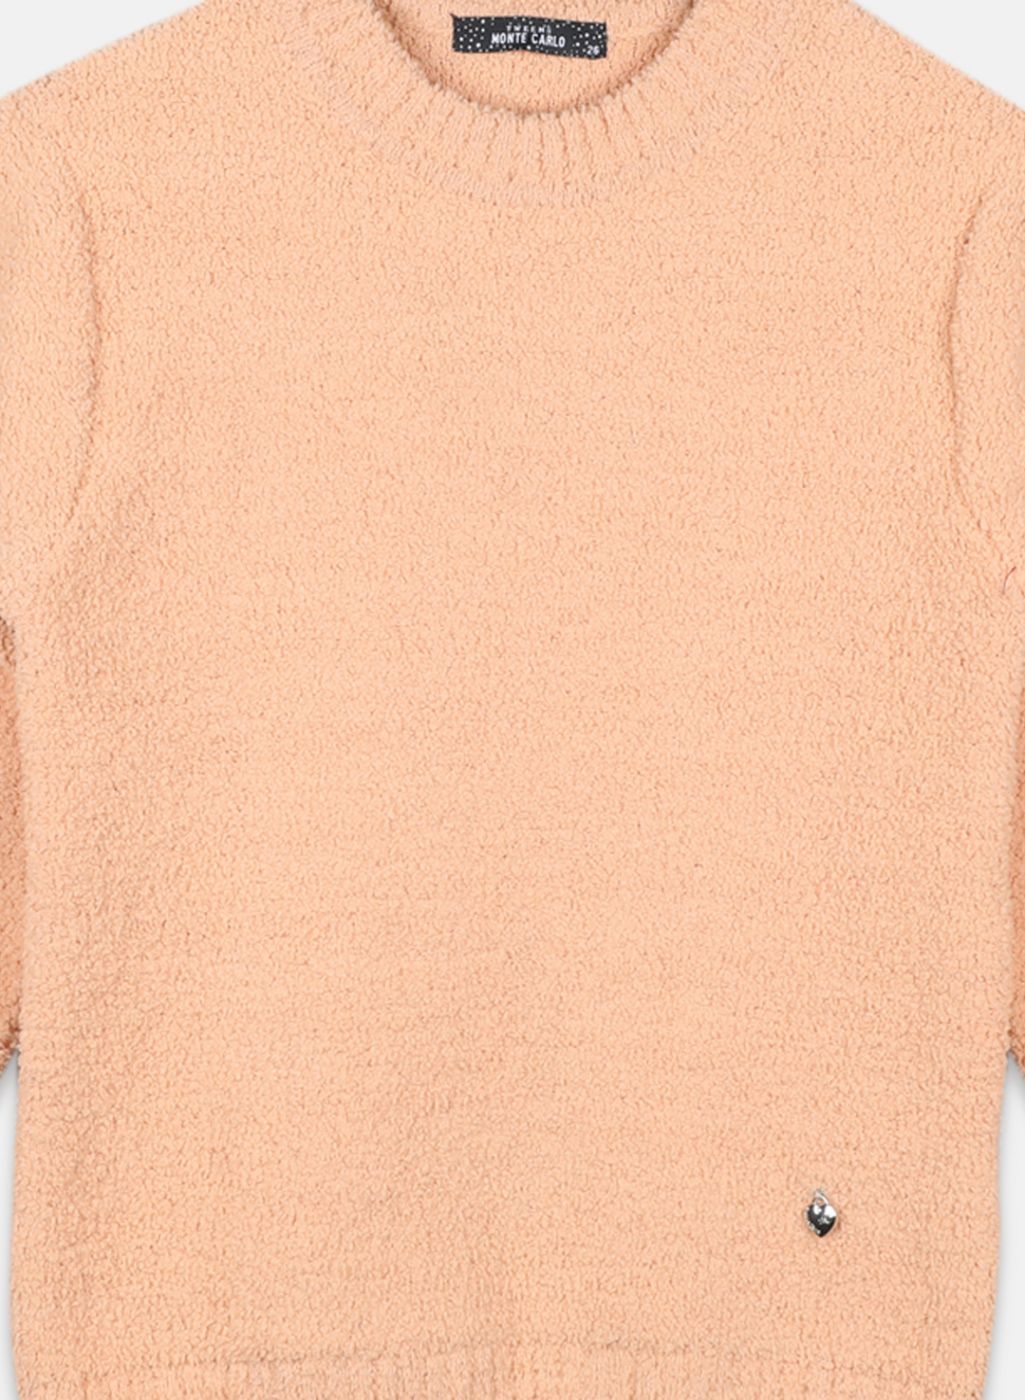 Girls Peach Solid Top